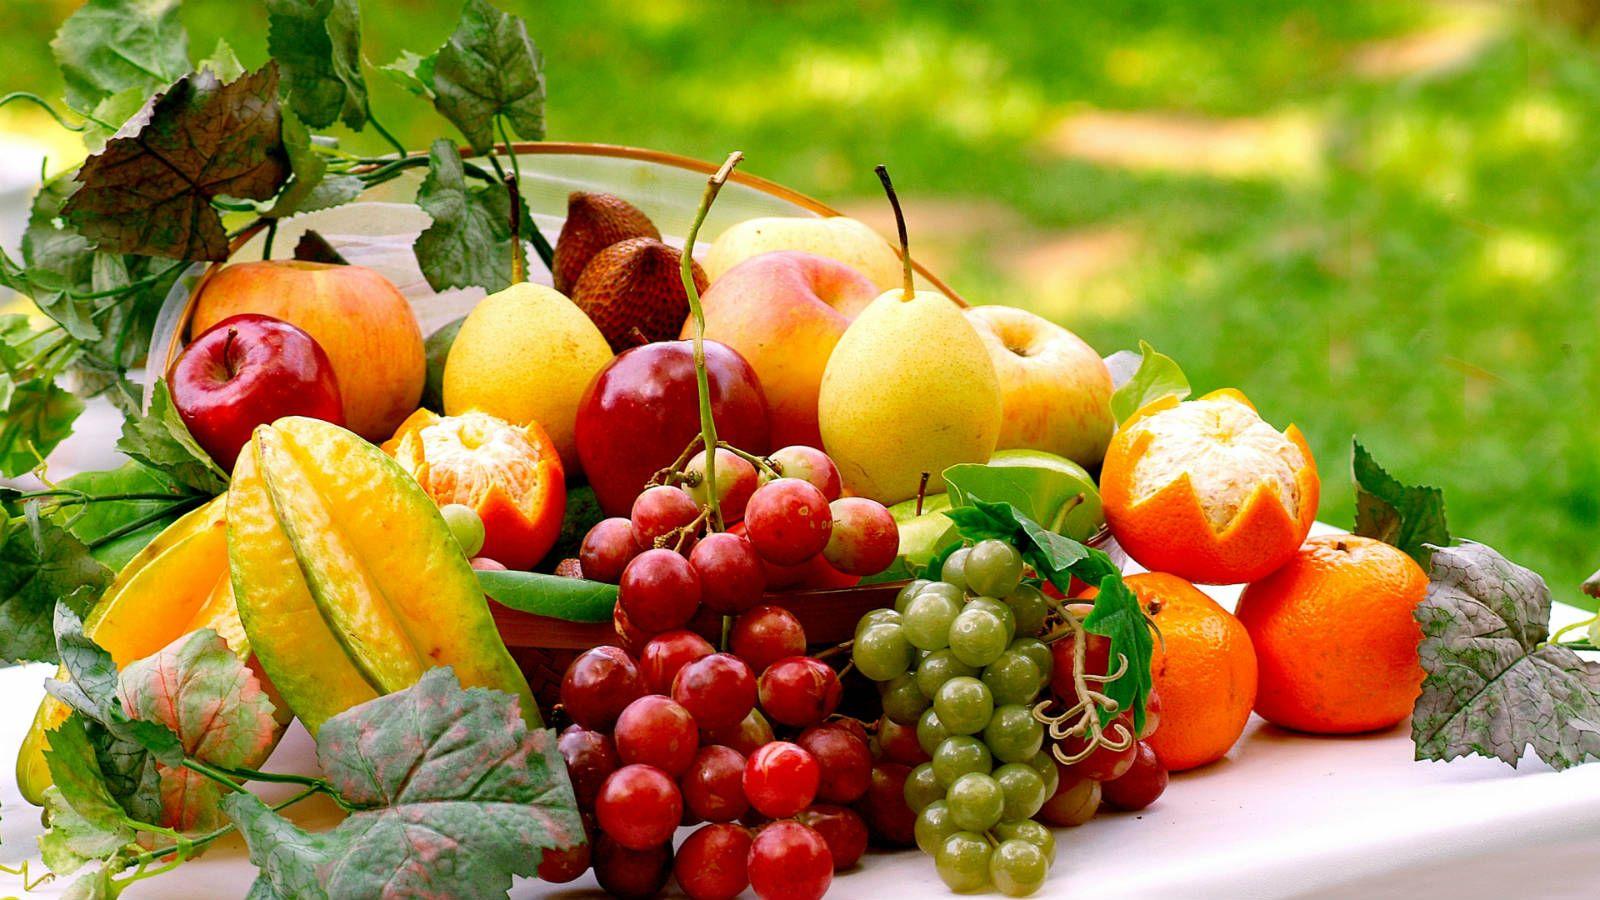 Fruits And Vegetables Image HD. Best Image Background